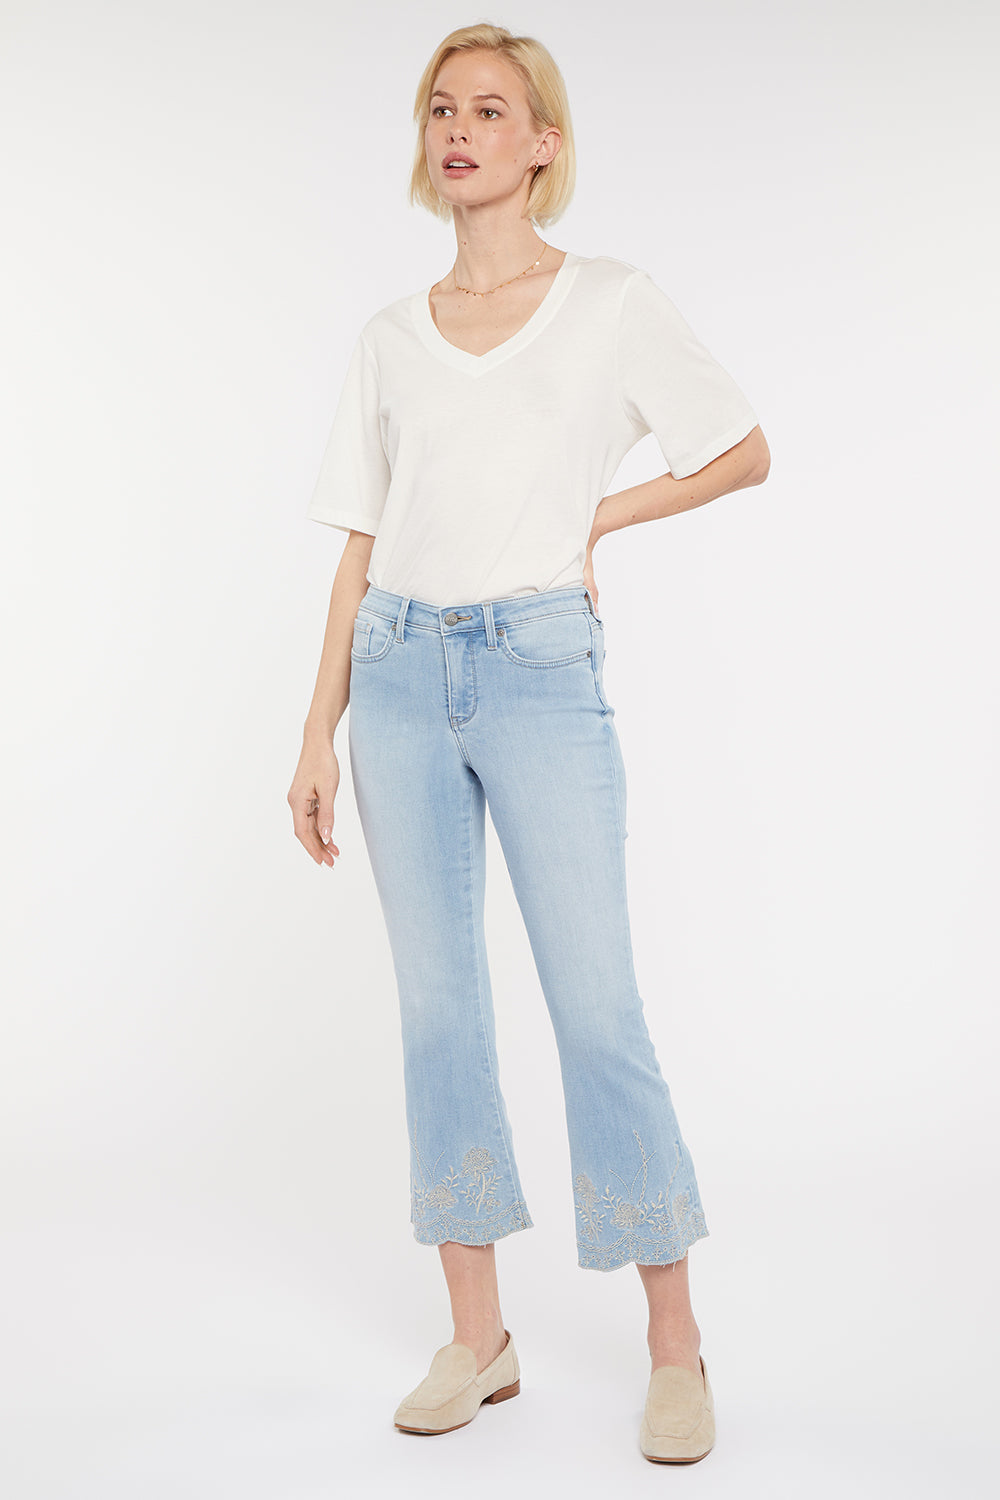 NYDJ Fiona Slim Flared Ankle Jeans With Embroidery - Northstar